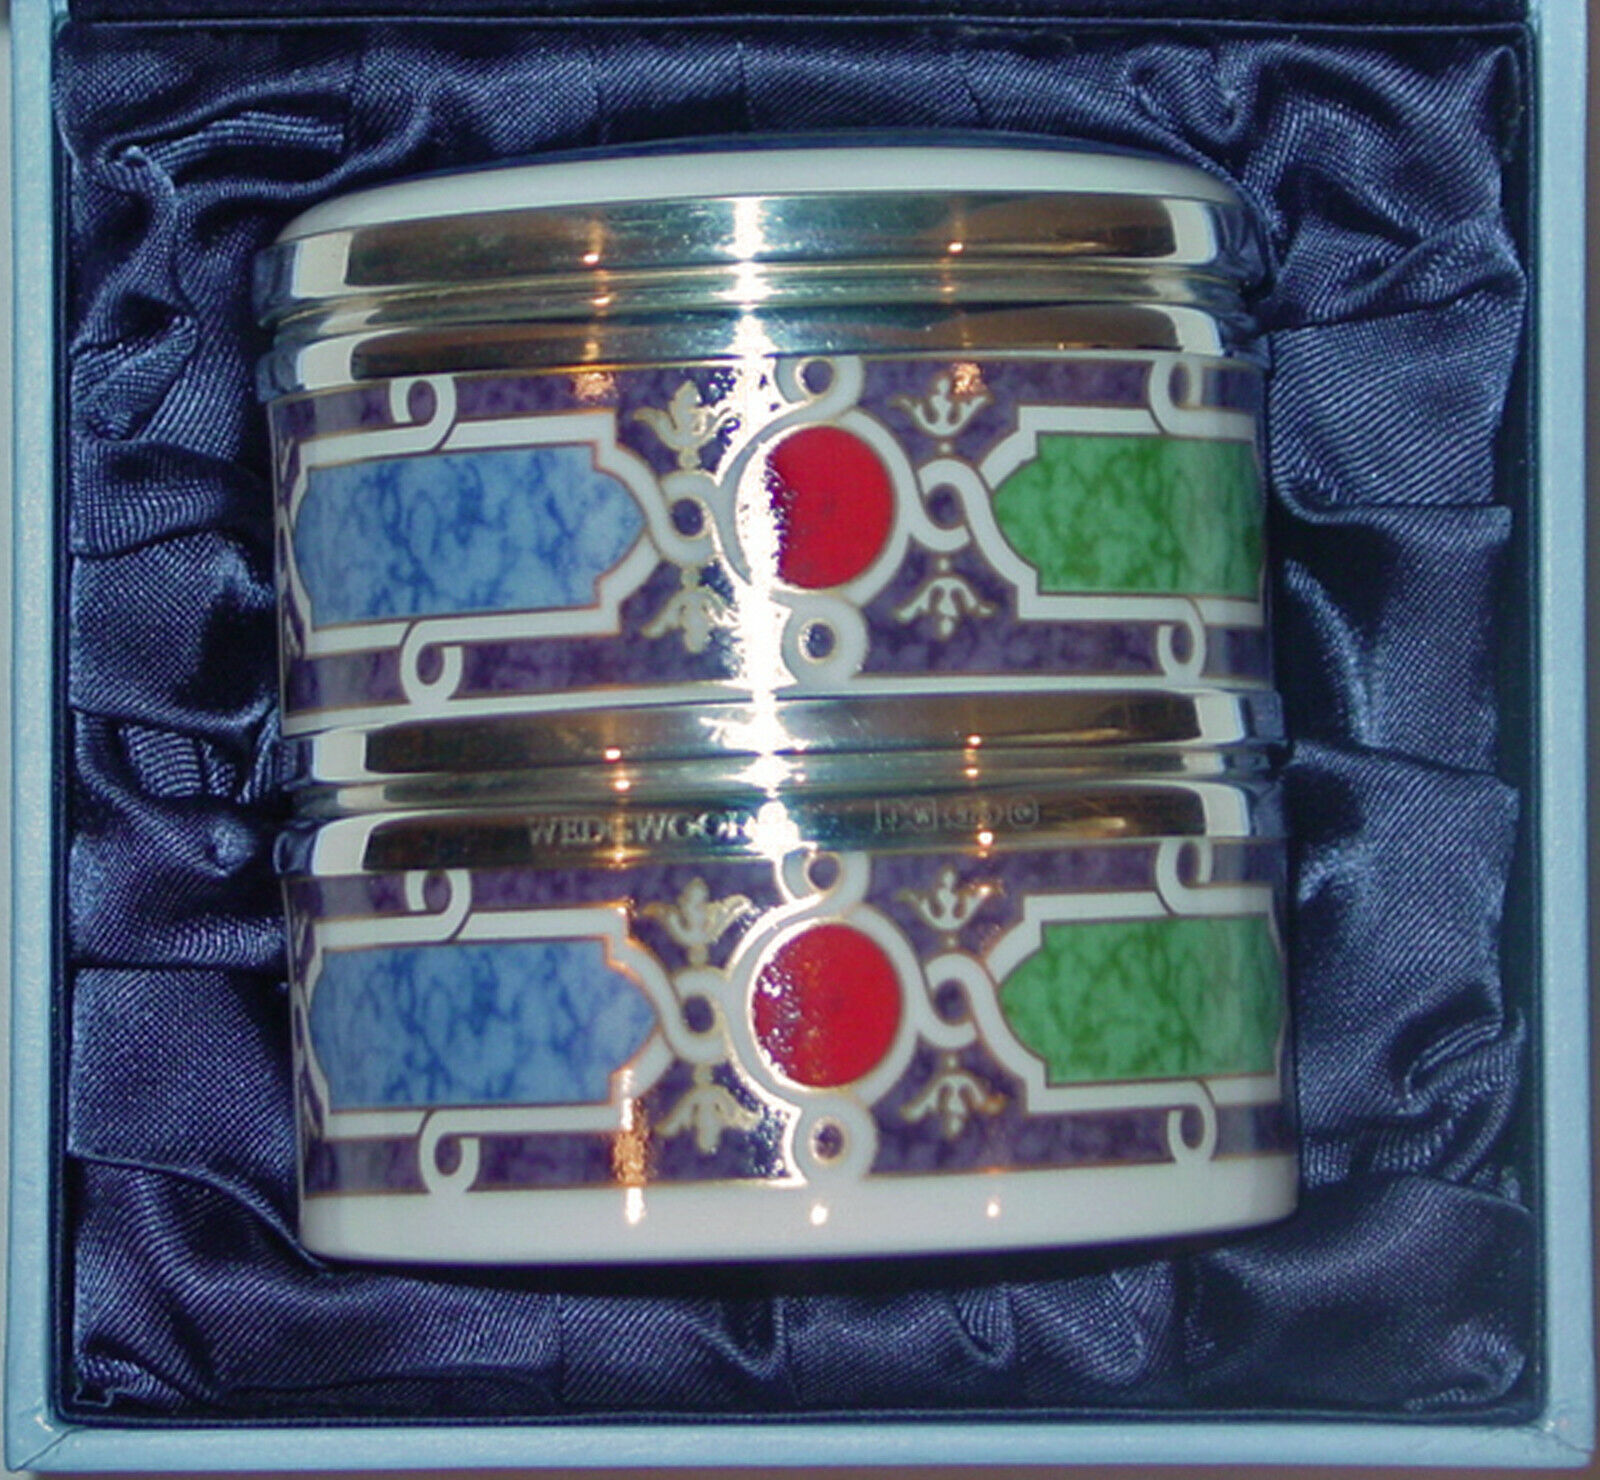 DISCONTINUED WEDGWOOD HIDDEN TREASURES WINDSOR BOX STERLING SILVER NEW IN BOX